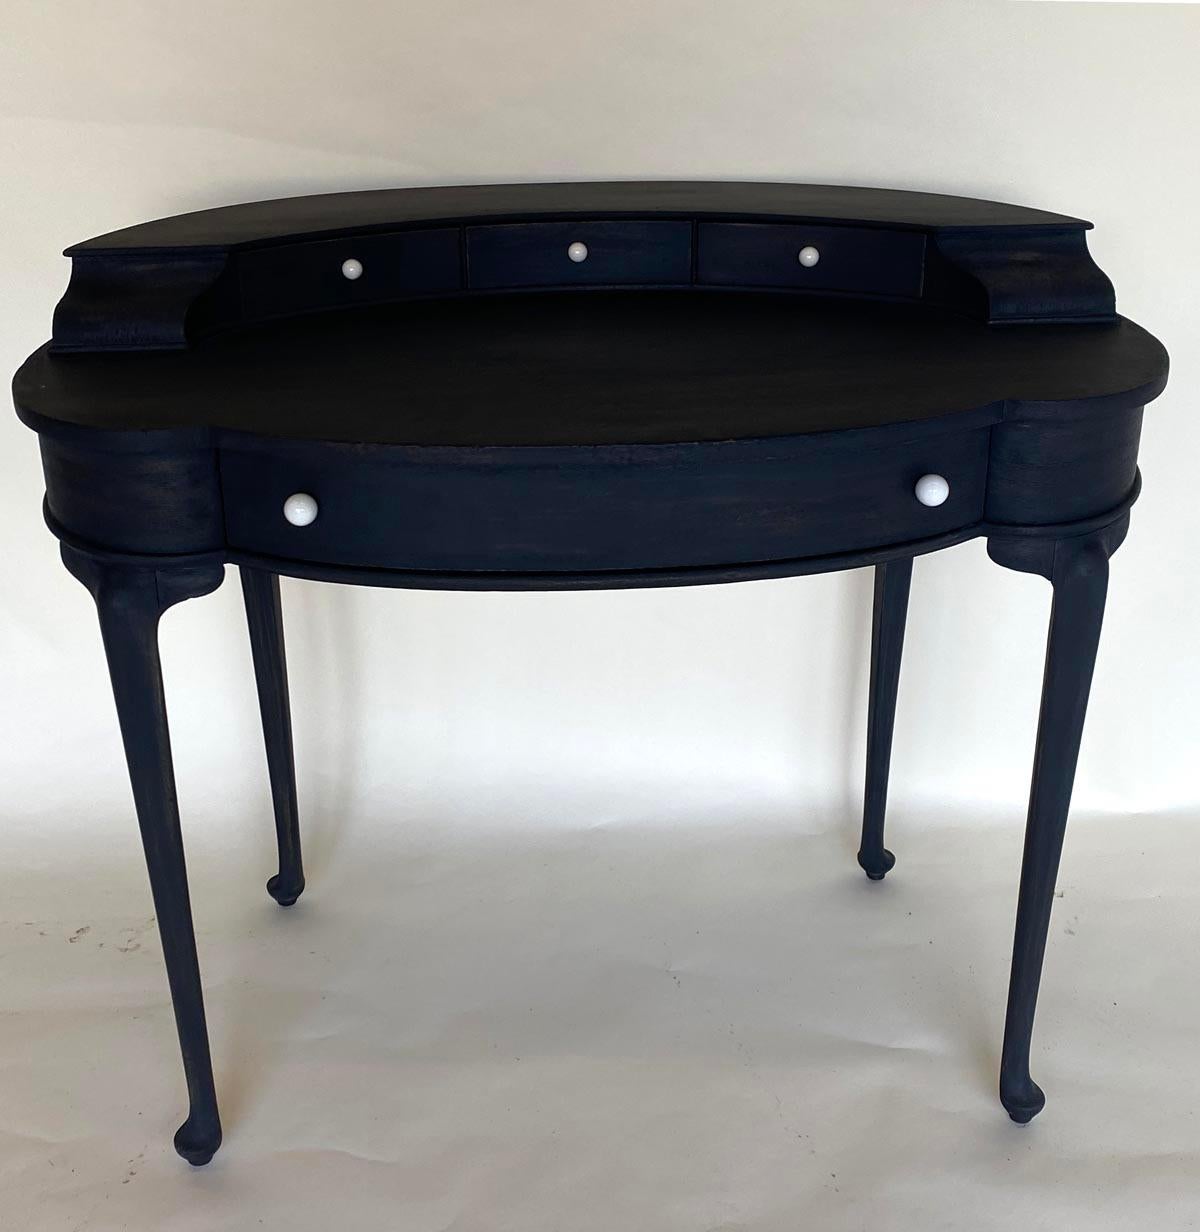 This small Queen Anne dressing table/writing table is a delicate one with elegant narrow, bow legs and small pad feet.
Adequate space for toiletries or laptop, it has 5 drawers for storage. It could also be used as a sink vanity in a small powder